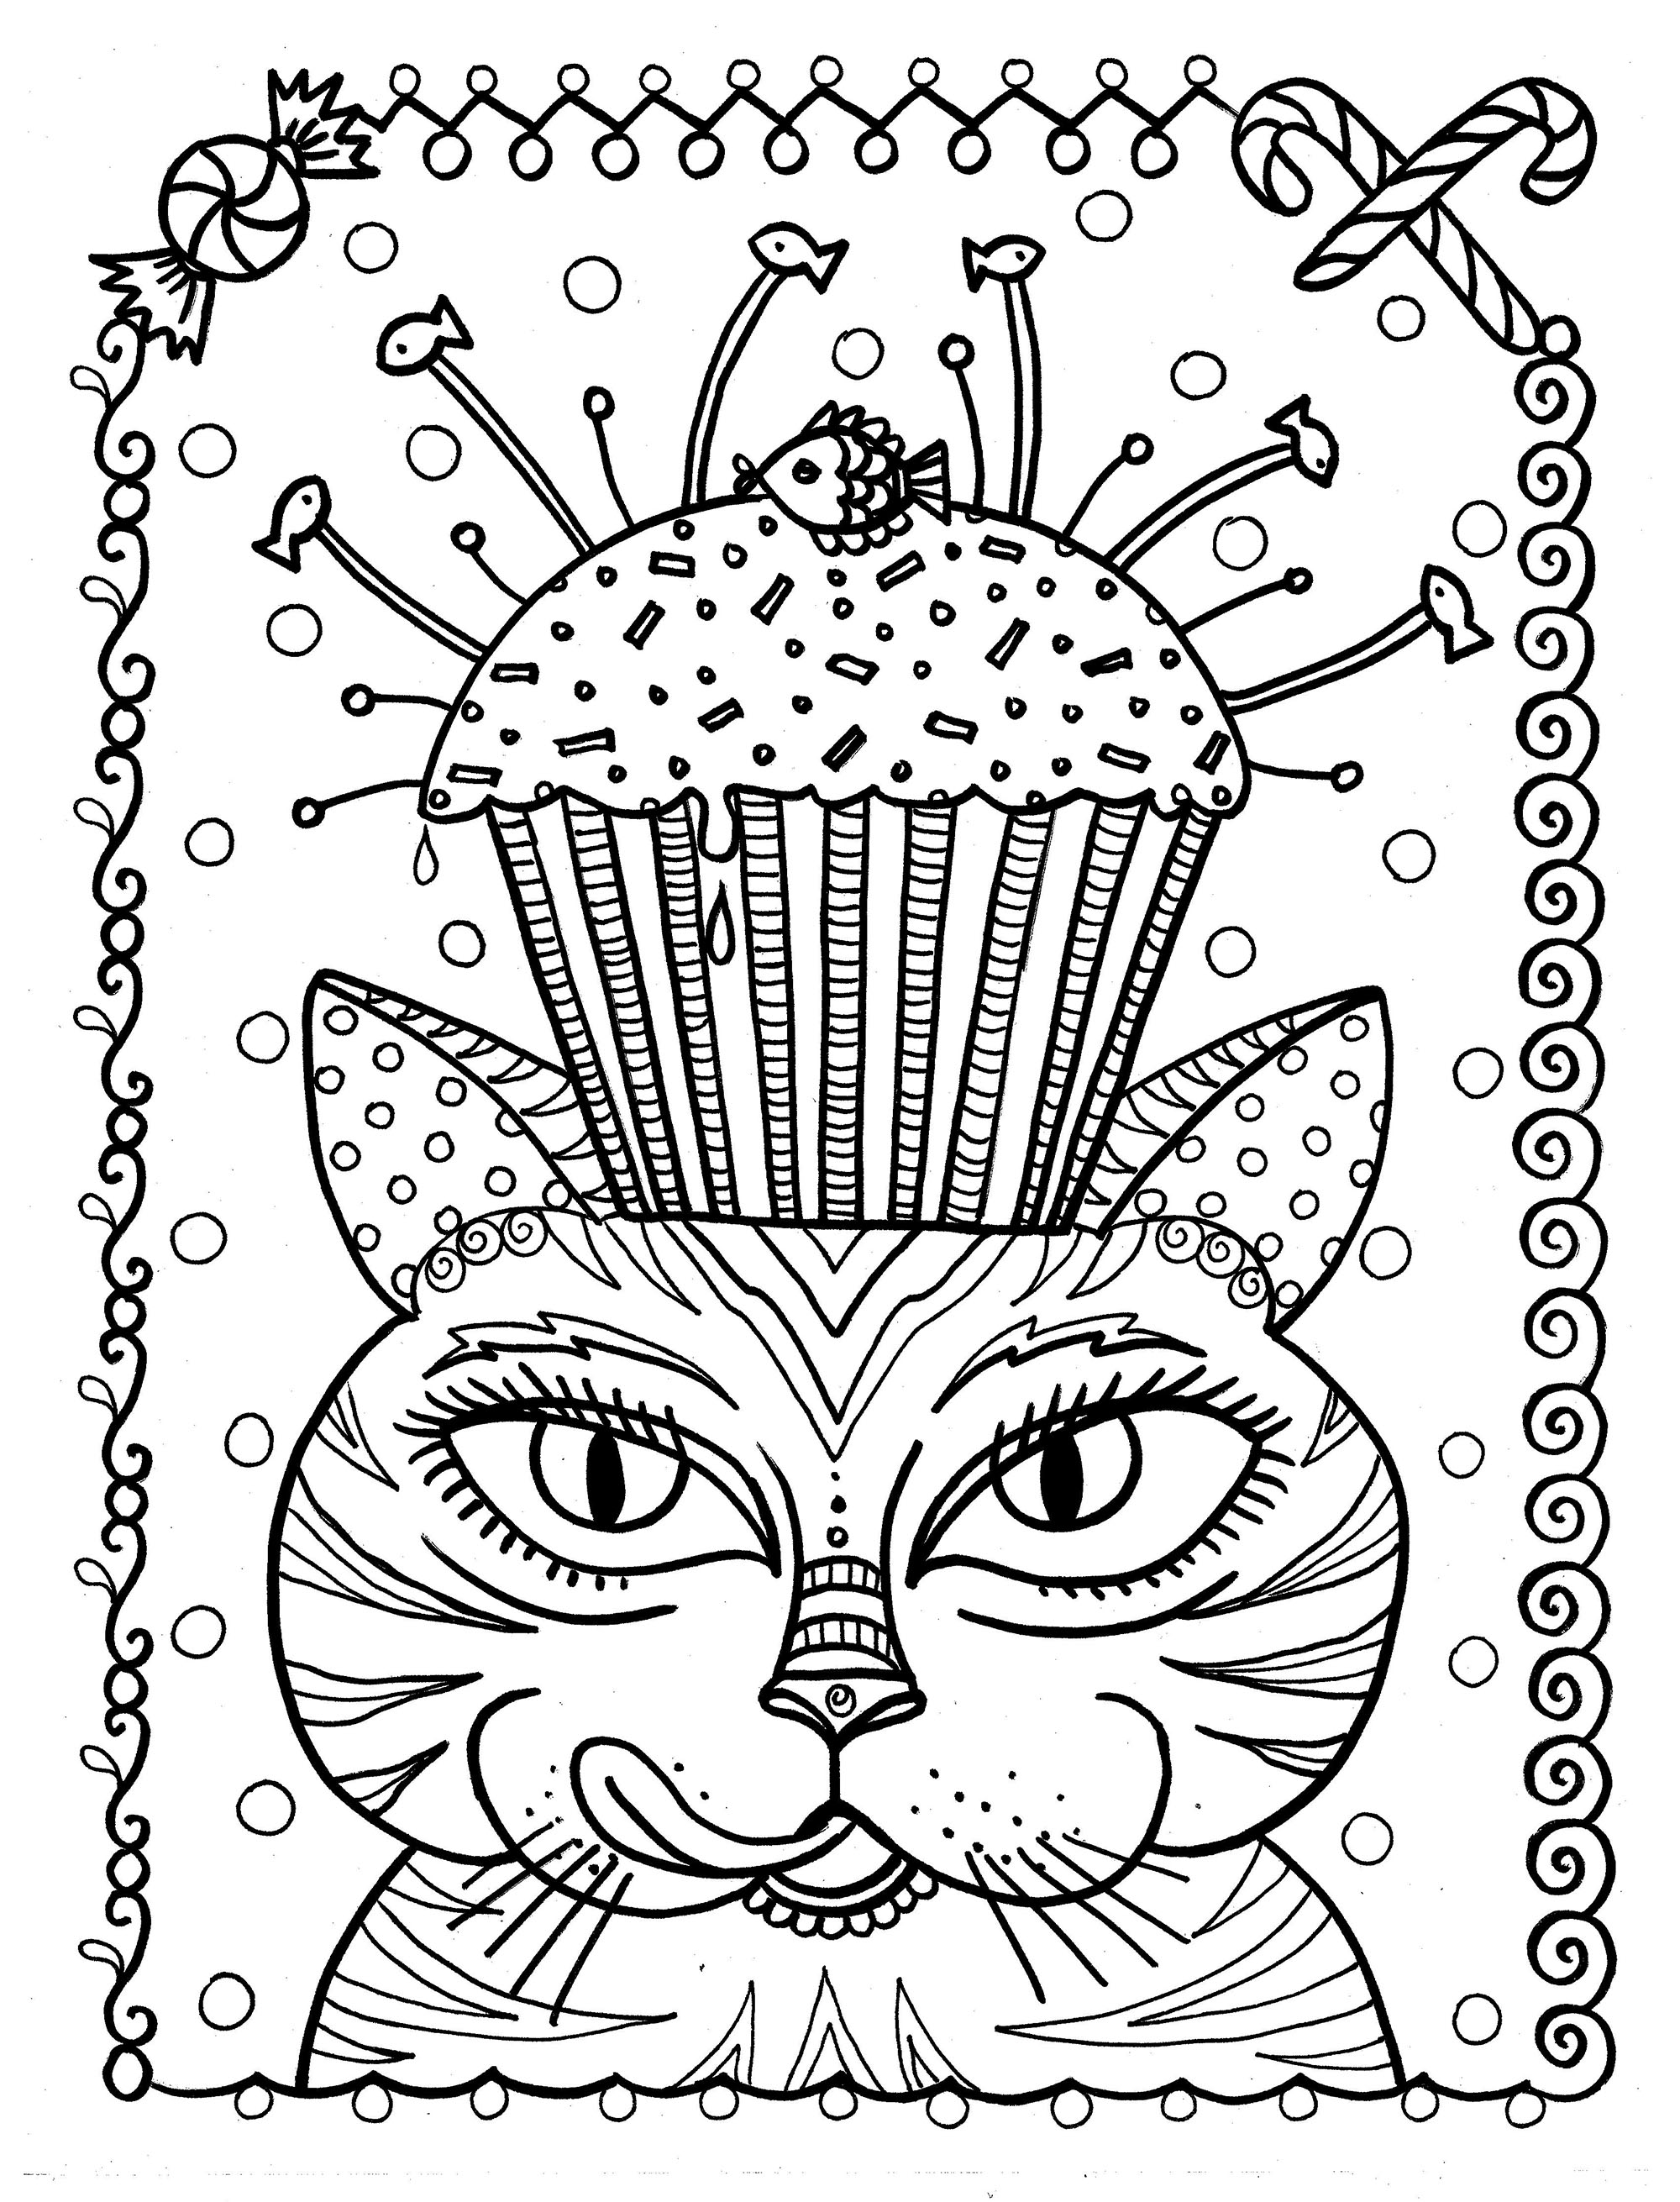 A fish cupcake! A treat for this cat. This cat is going to enjoy this funny cupcake ...Hurry up and color it before there are only crumbs left... and bones!, Artist : Deborah Muller